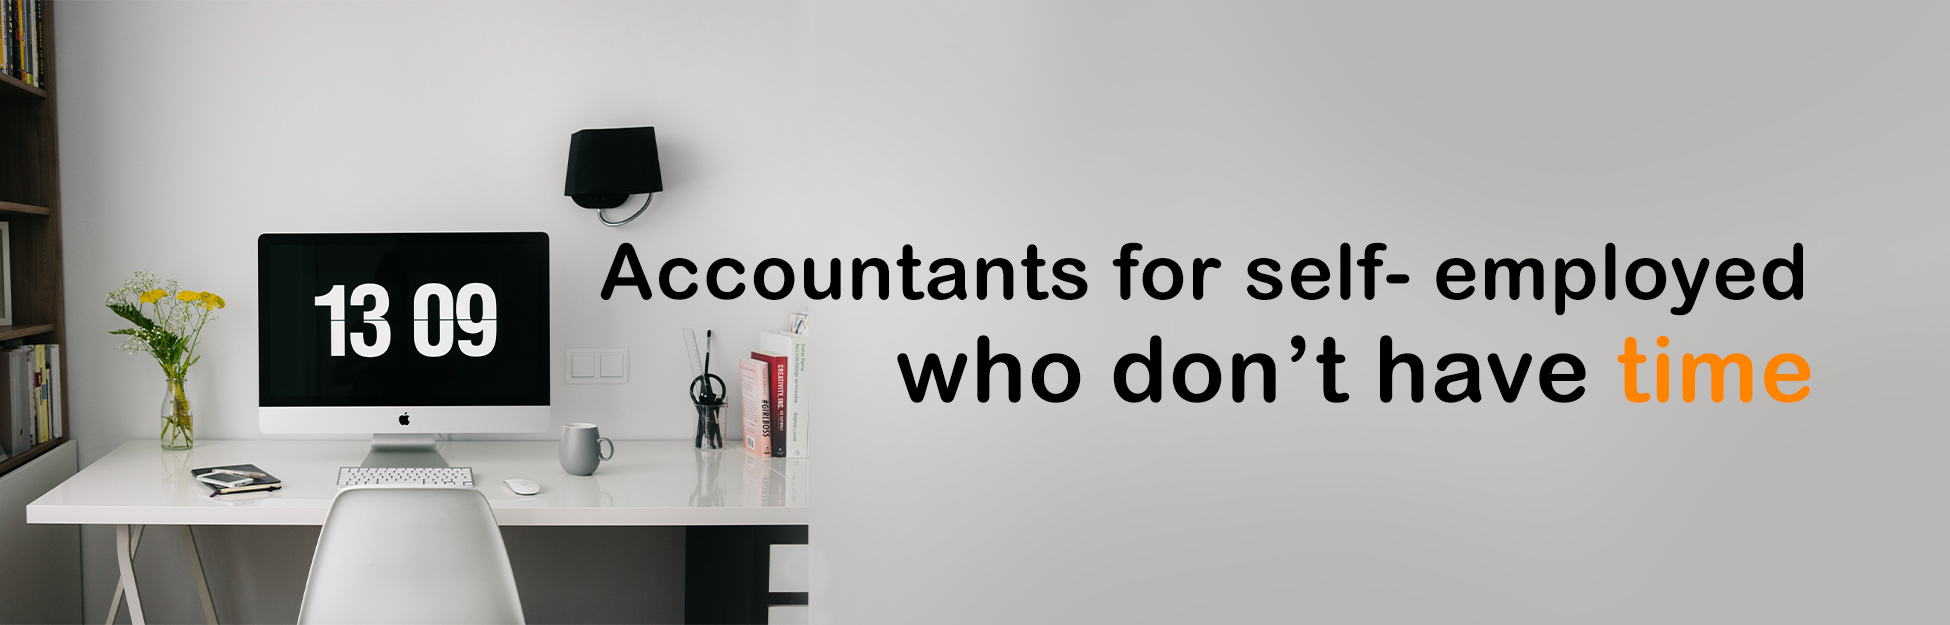 Accountants for self-employed who don't have time